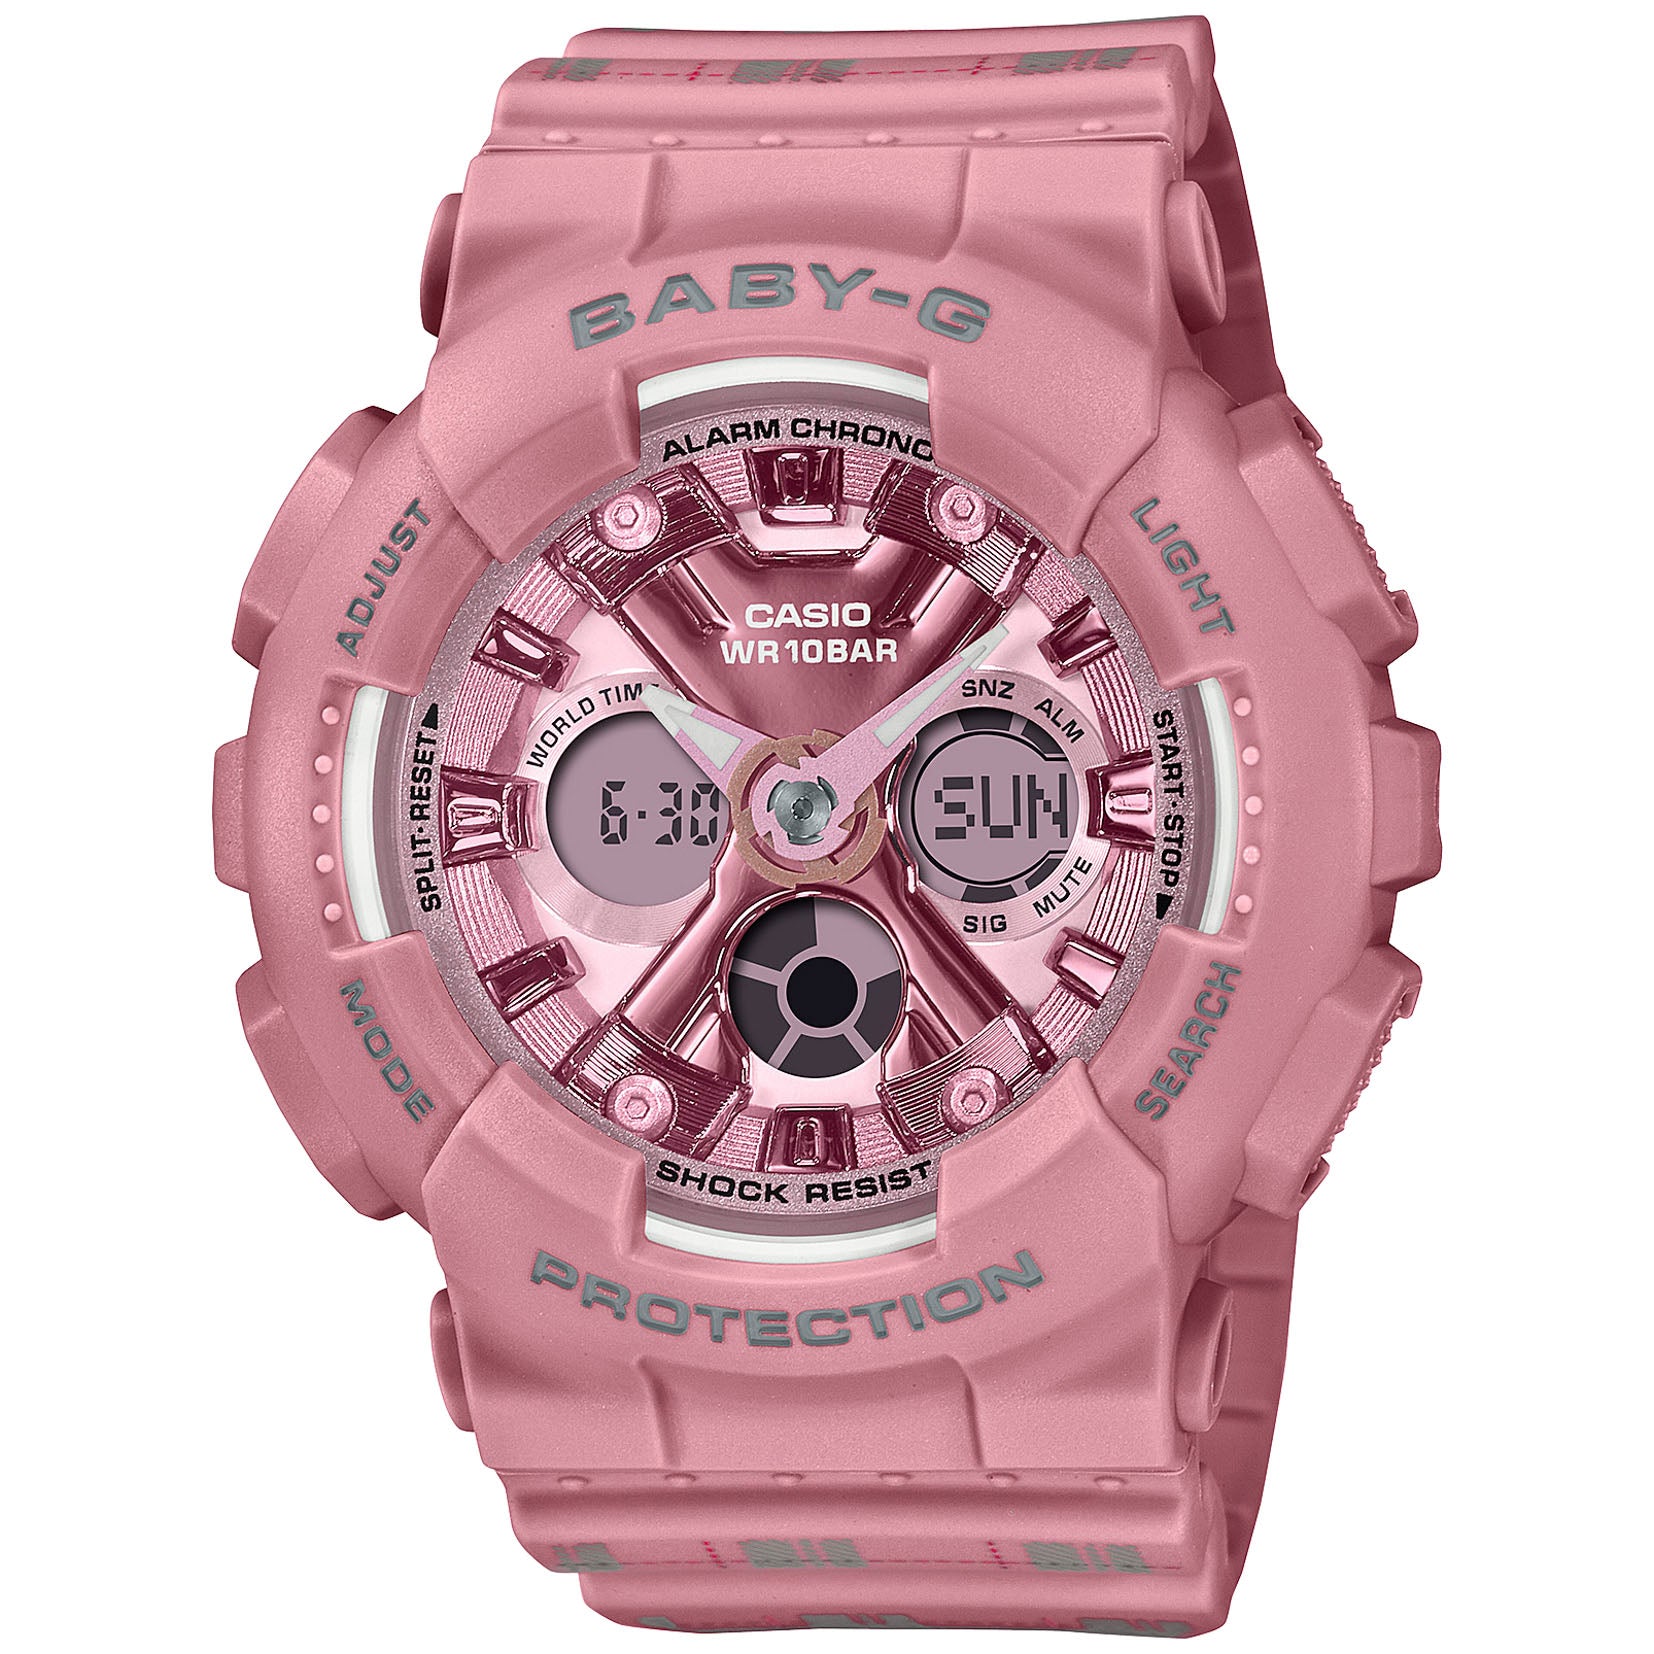 G Shock BA Baby G Pink Limited Edition